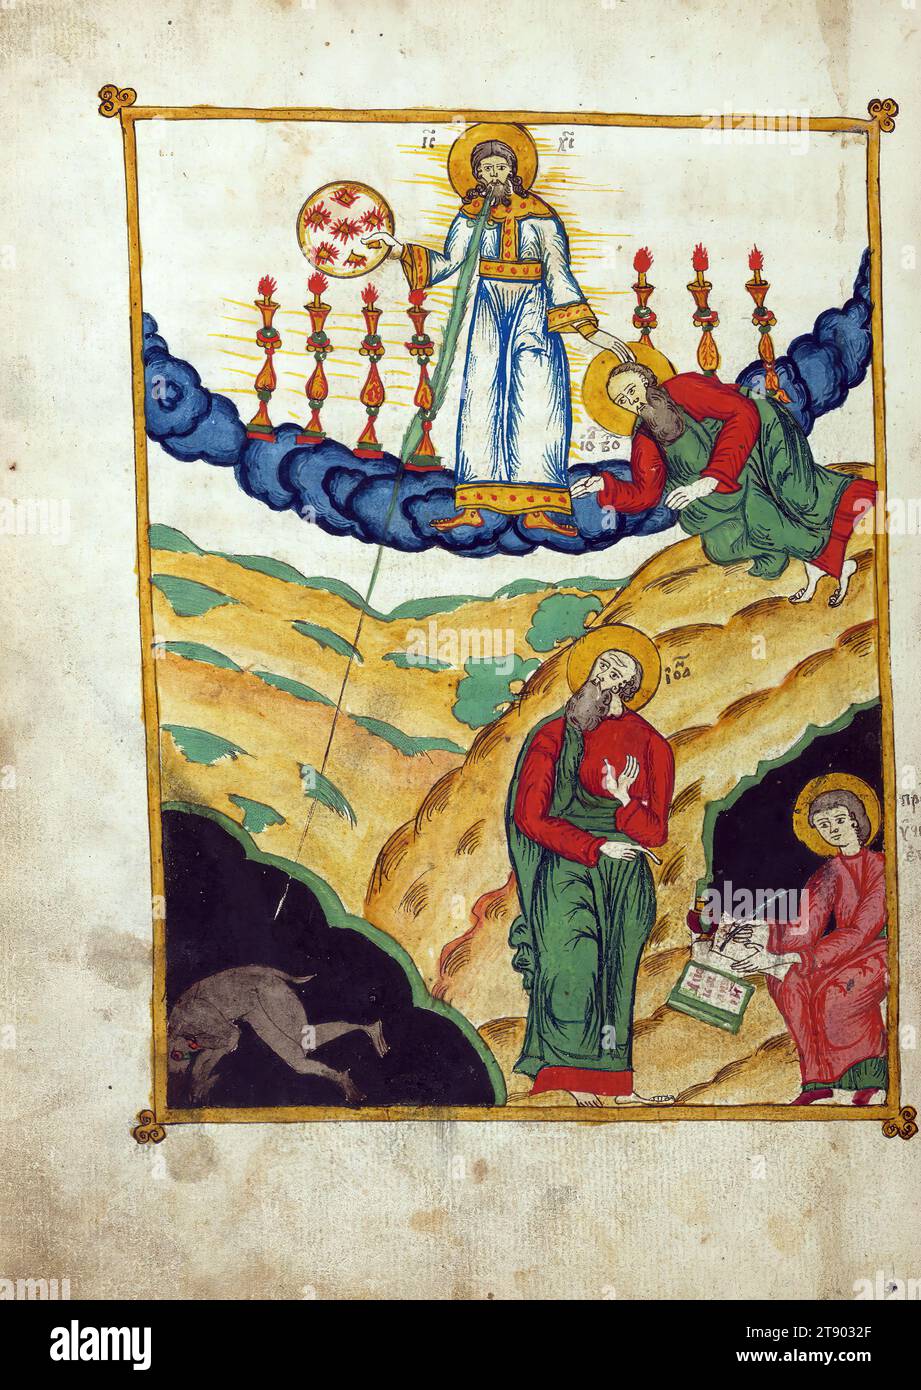 Apocalypse with Patristic commentary, St. John narrates his vision, This manuscript was made around 1800 by the 'Old Believers,' a group of Russian Christians who dissented from the Russian Orthodox Church and were subsequently persecuted and excommunicated. Because their books were often confiscated and they were forbidden to use printing presses, they continued to write important works such as this one by hand Stock Photo